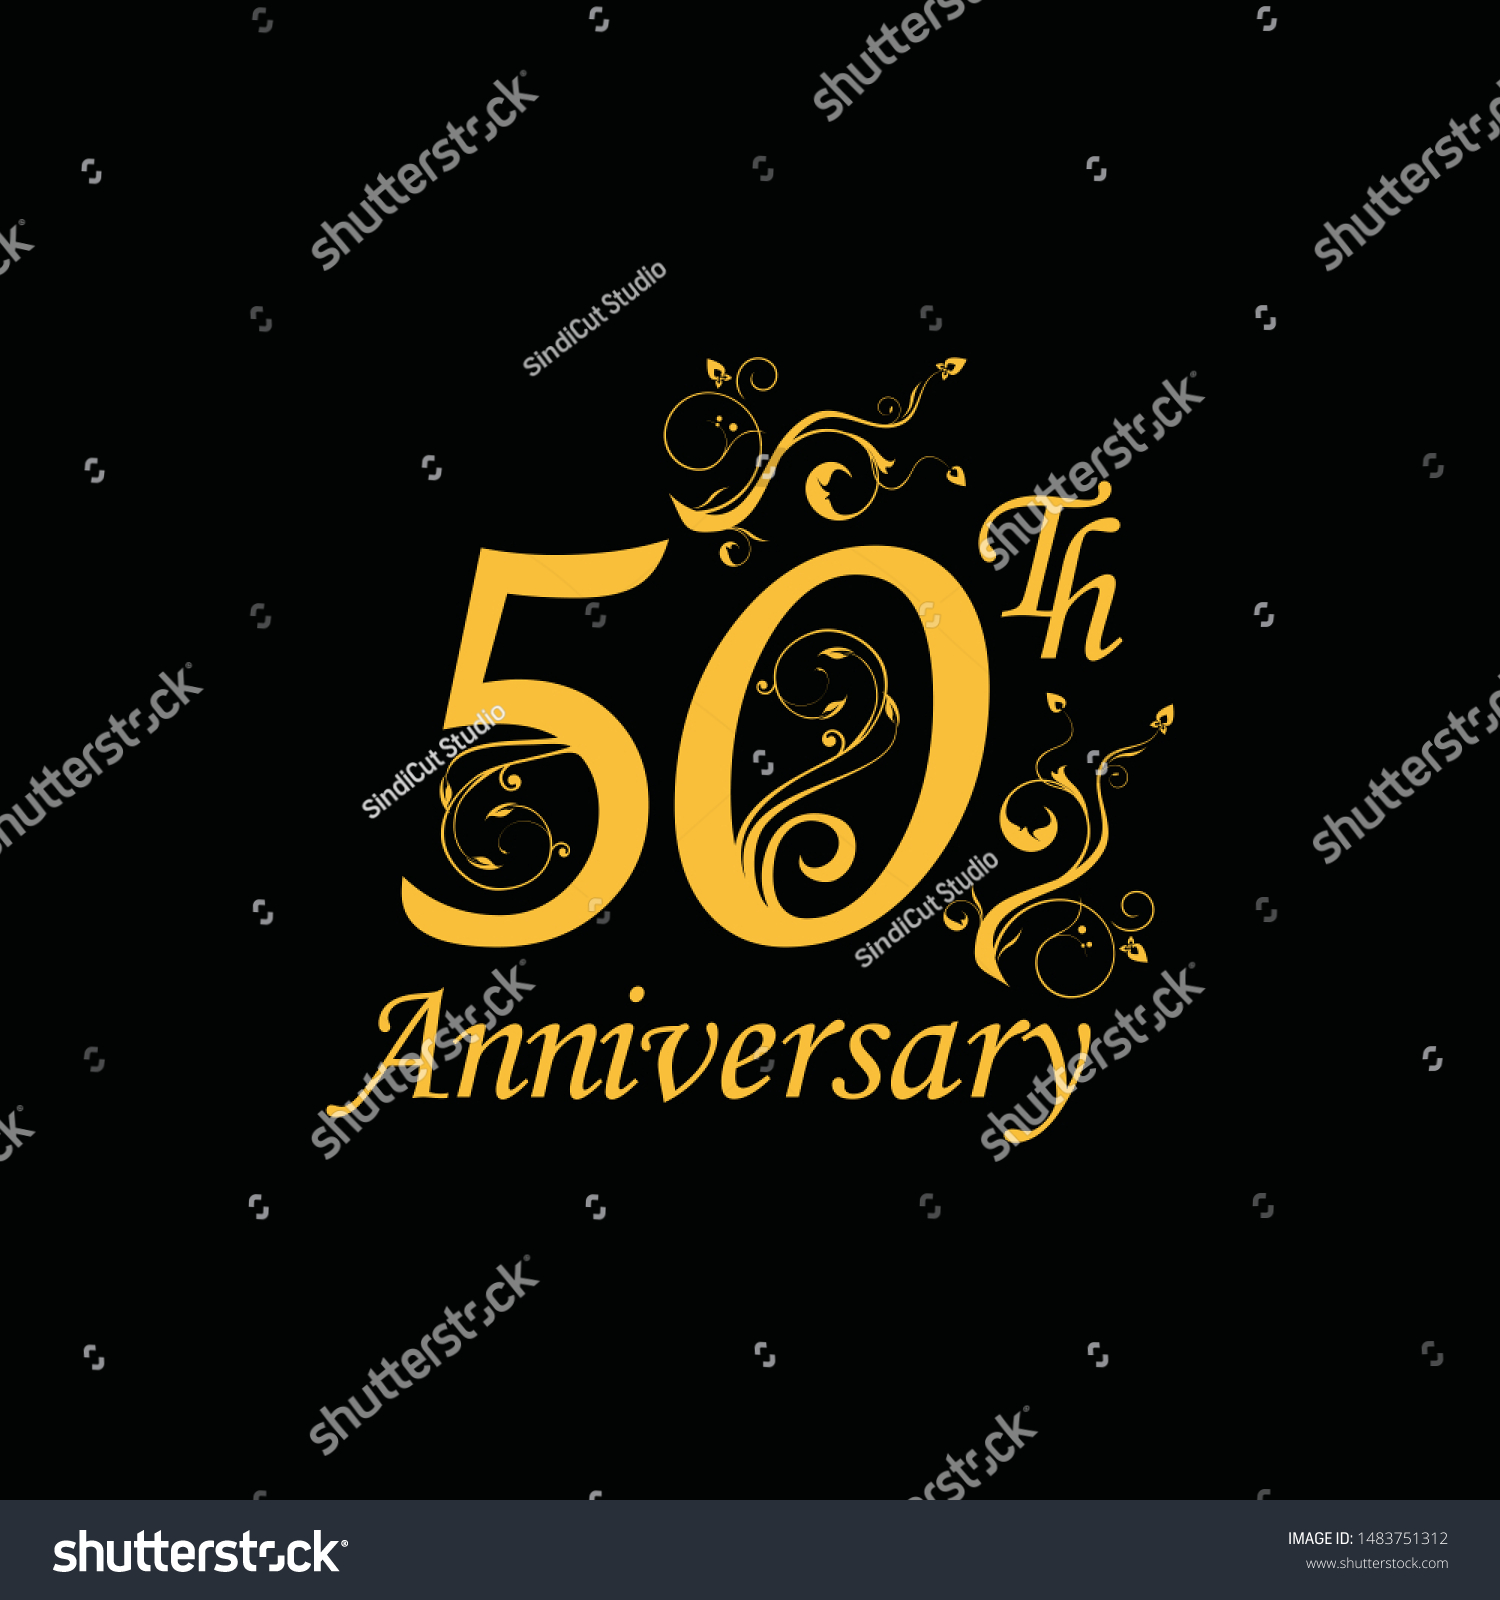 50 Anniversary Gold Numbers Golden Confetti Stock Vector (Royalty Free ...